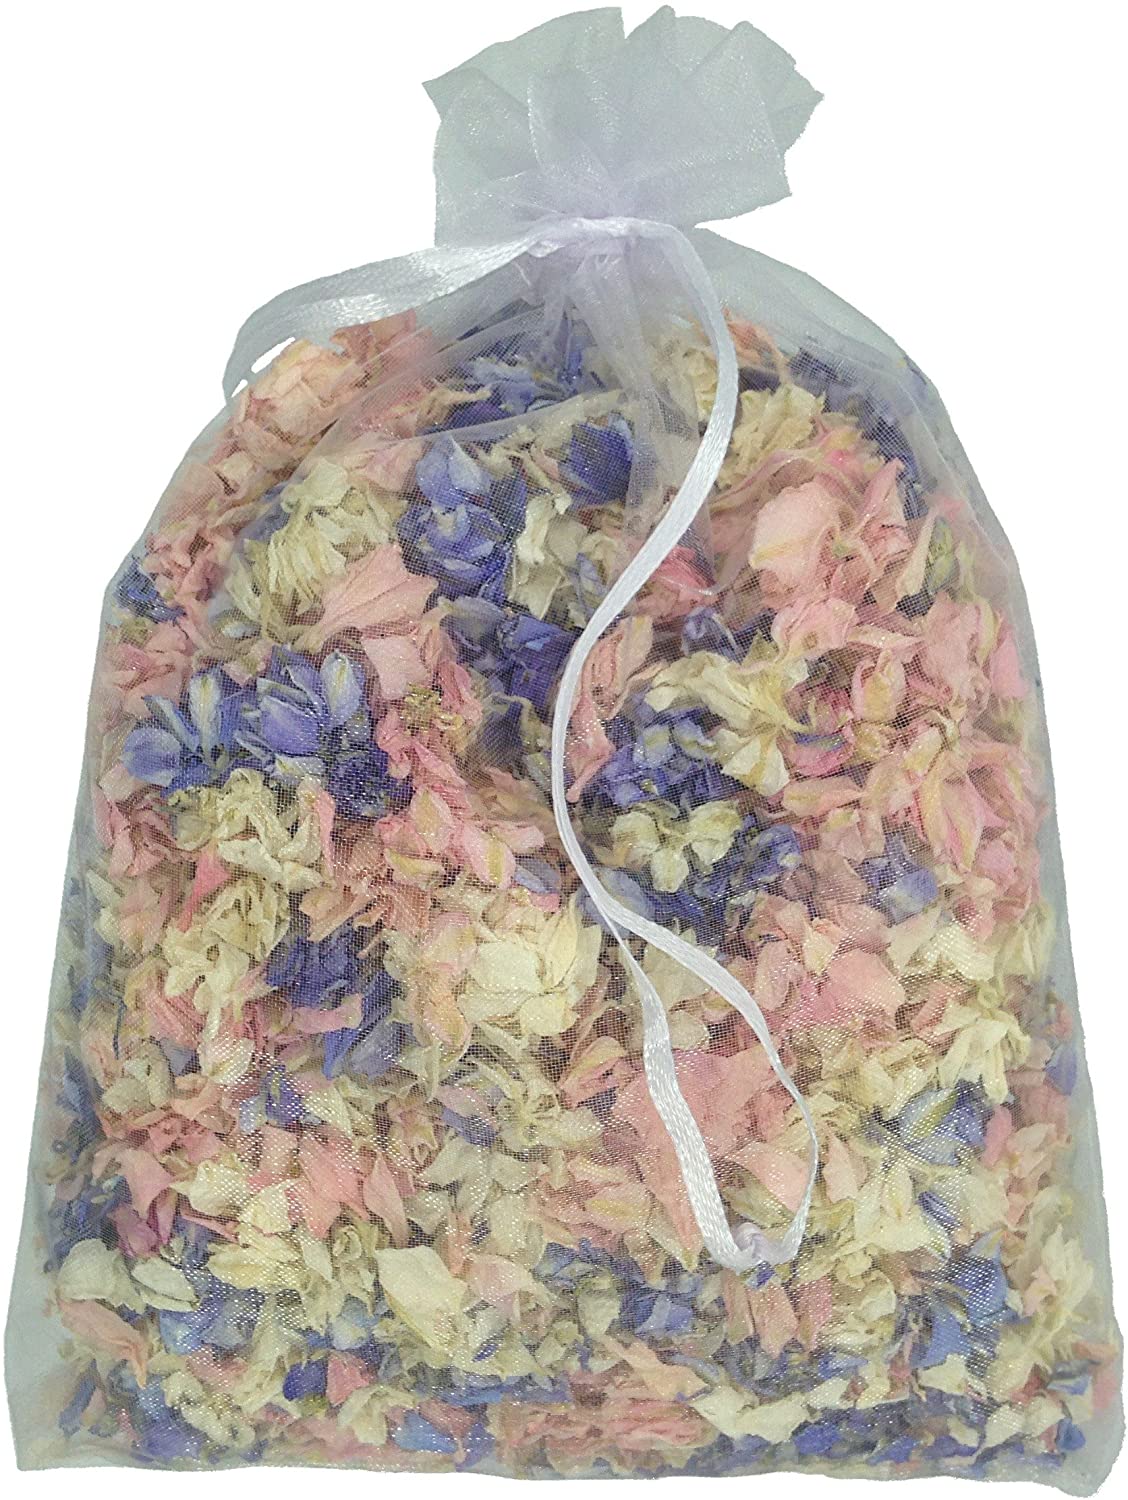 Wedding Throwing Confetti 1 Litre of Pale Pink Natural Biodegradable Delphinium Petals with a White Organza Bag 